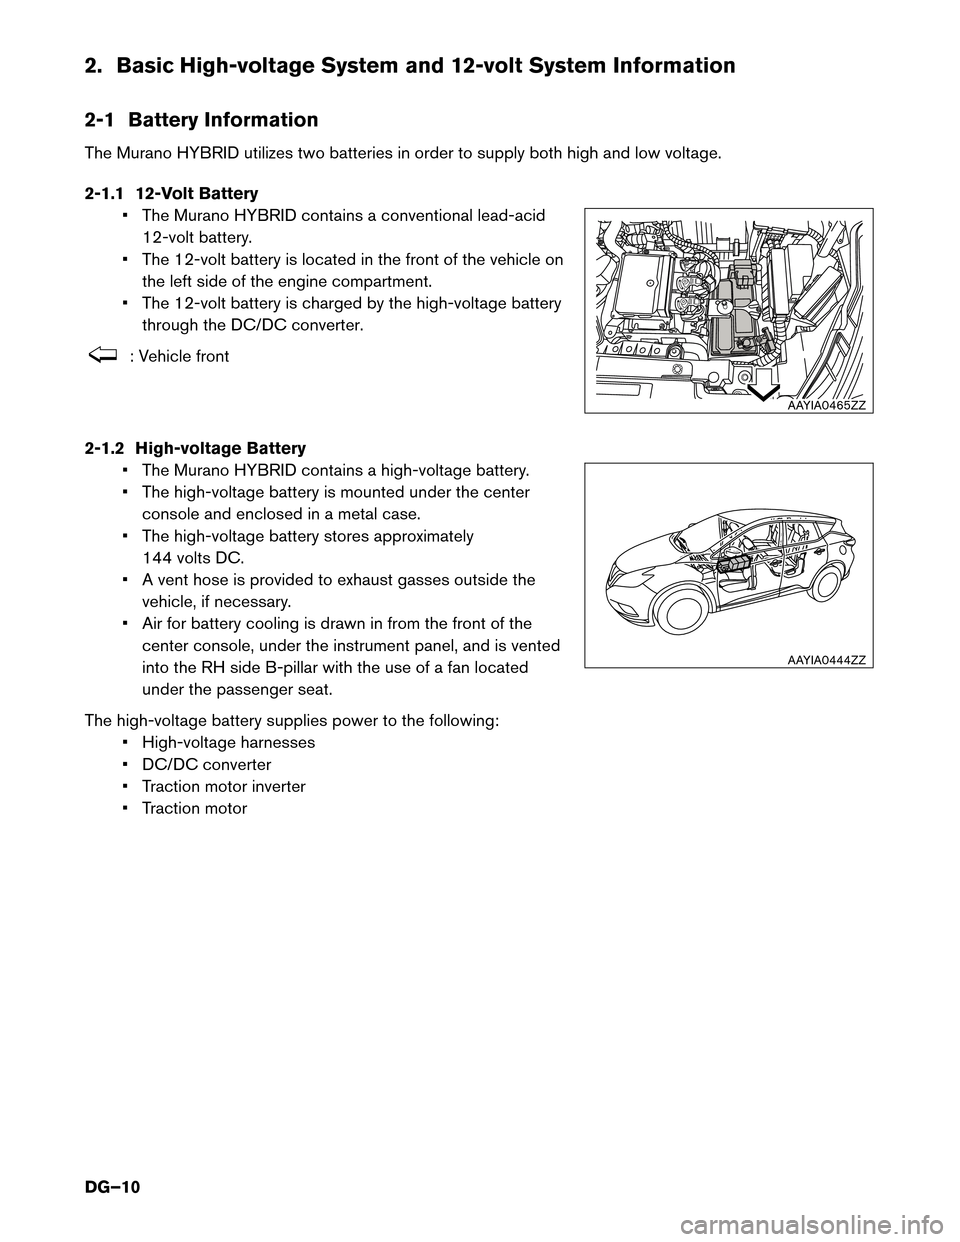 NISSAN MURANO HYBRID 2016 3.G Dismantling Guide 2. Basic High-voltage System and 12-volt System Information
2-1
Battery Information
The Murano HYBRID utilizes two batteries in order to supply both high and low voltage.
2-1.1 12-Volt Battery • The